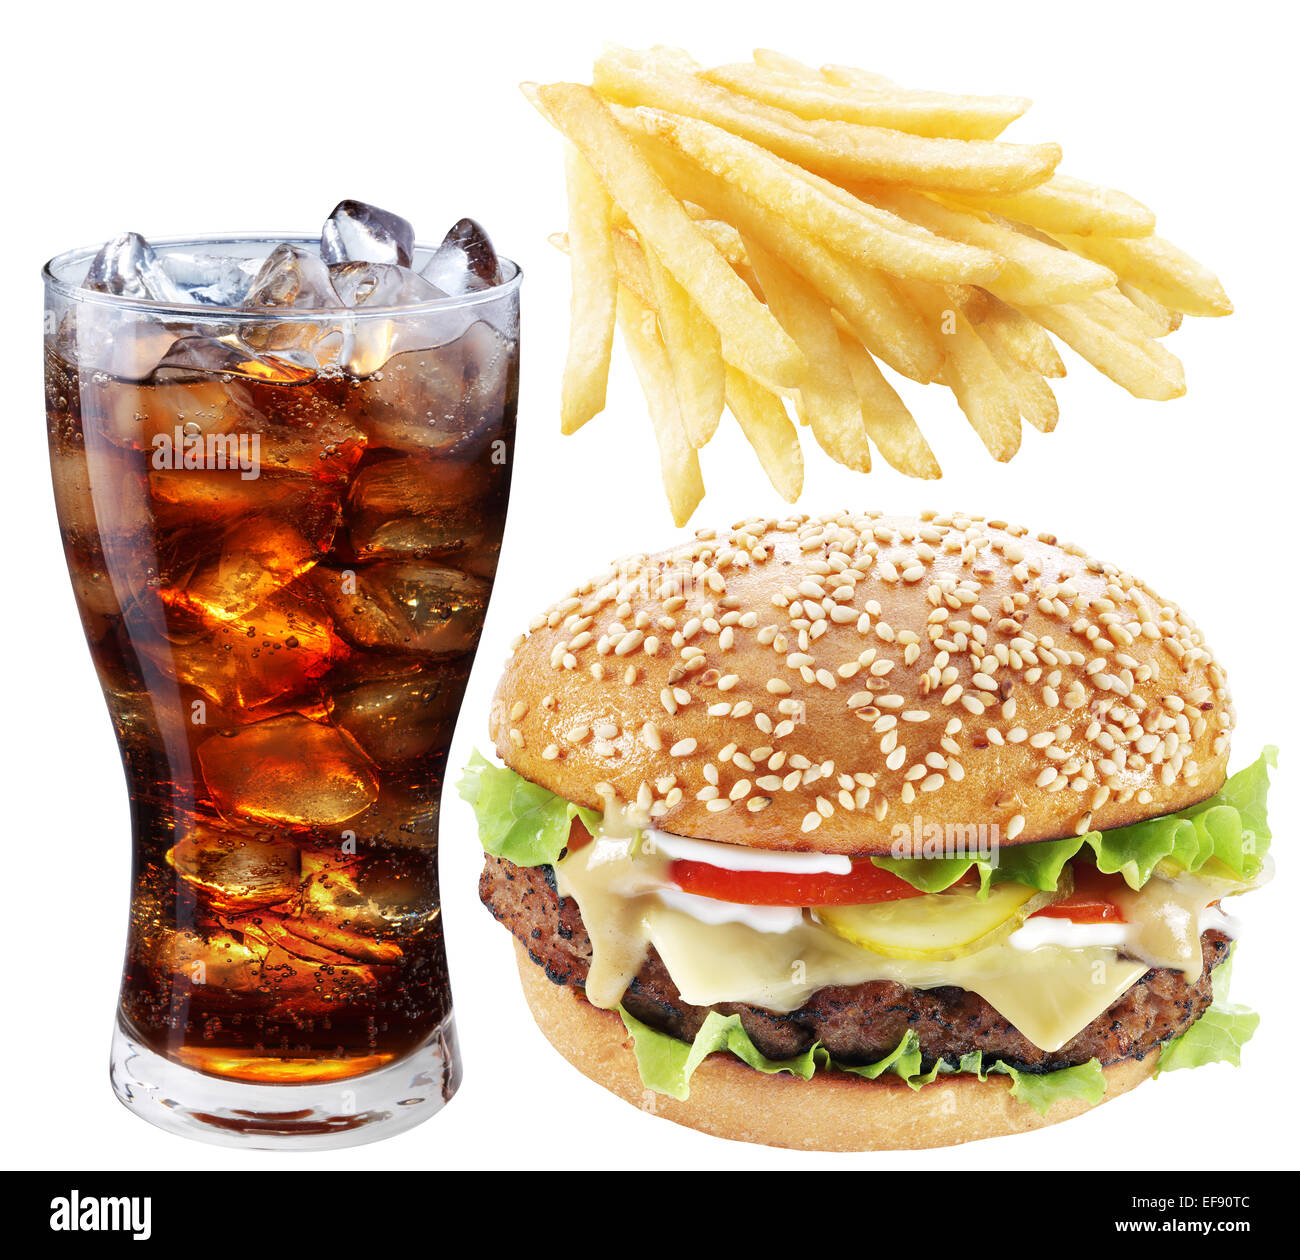 Hamburger, potato fries, cola drink. Takeaway food. File contains clipping paths. Stock Photo